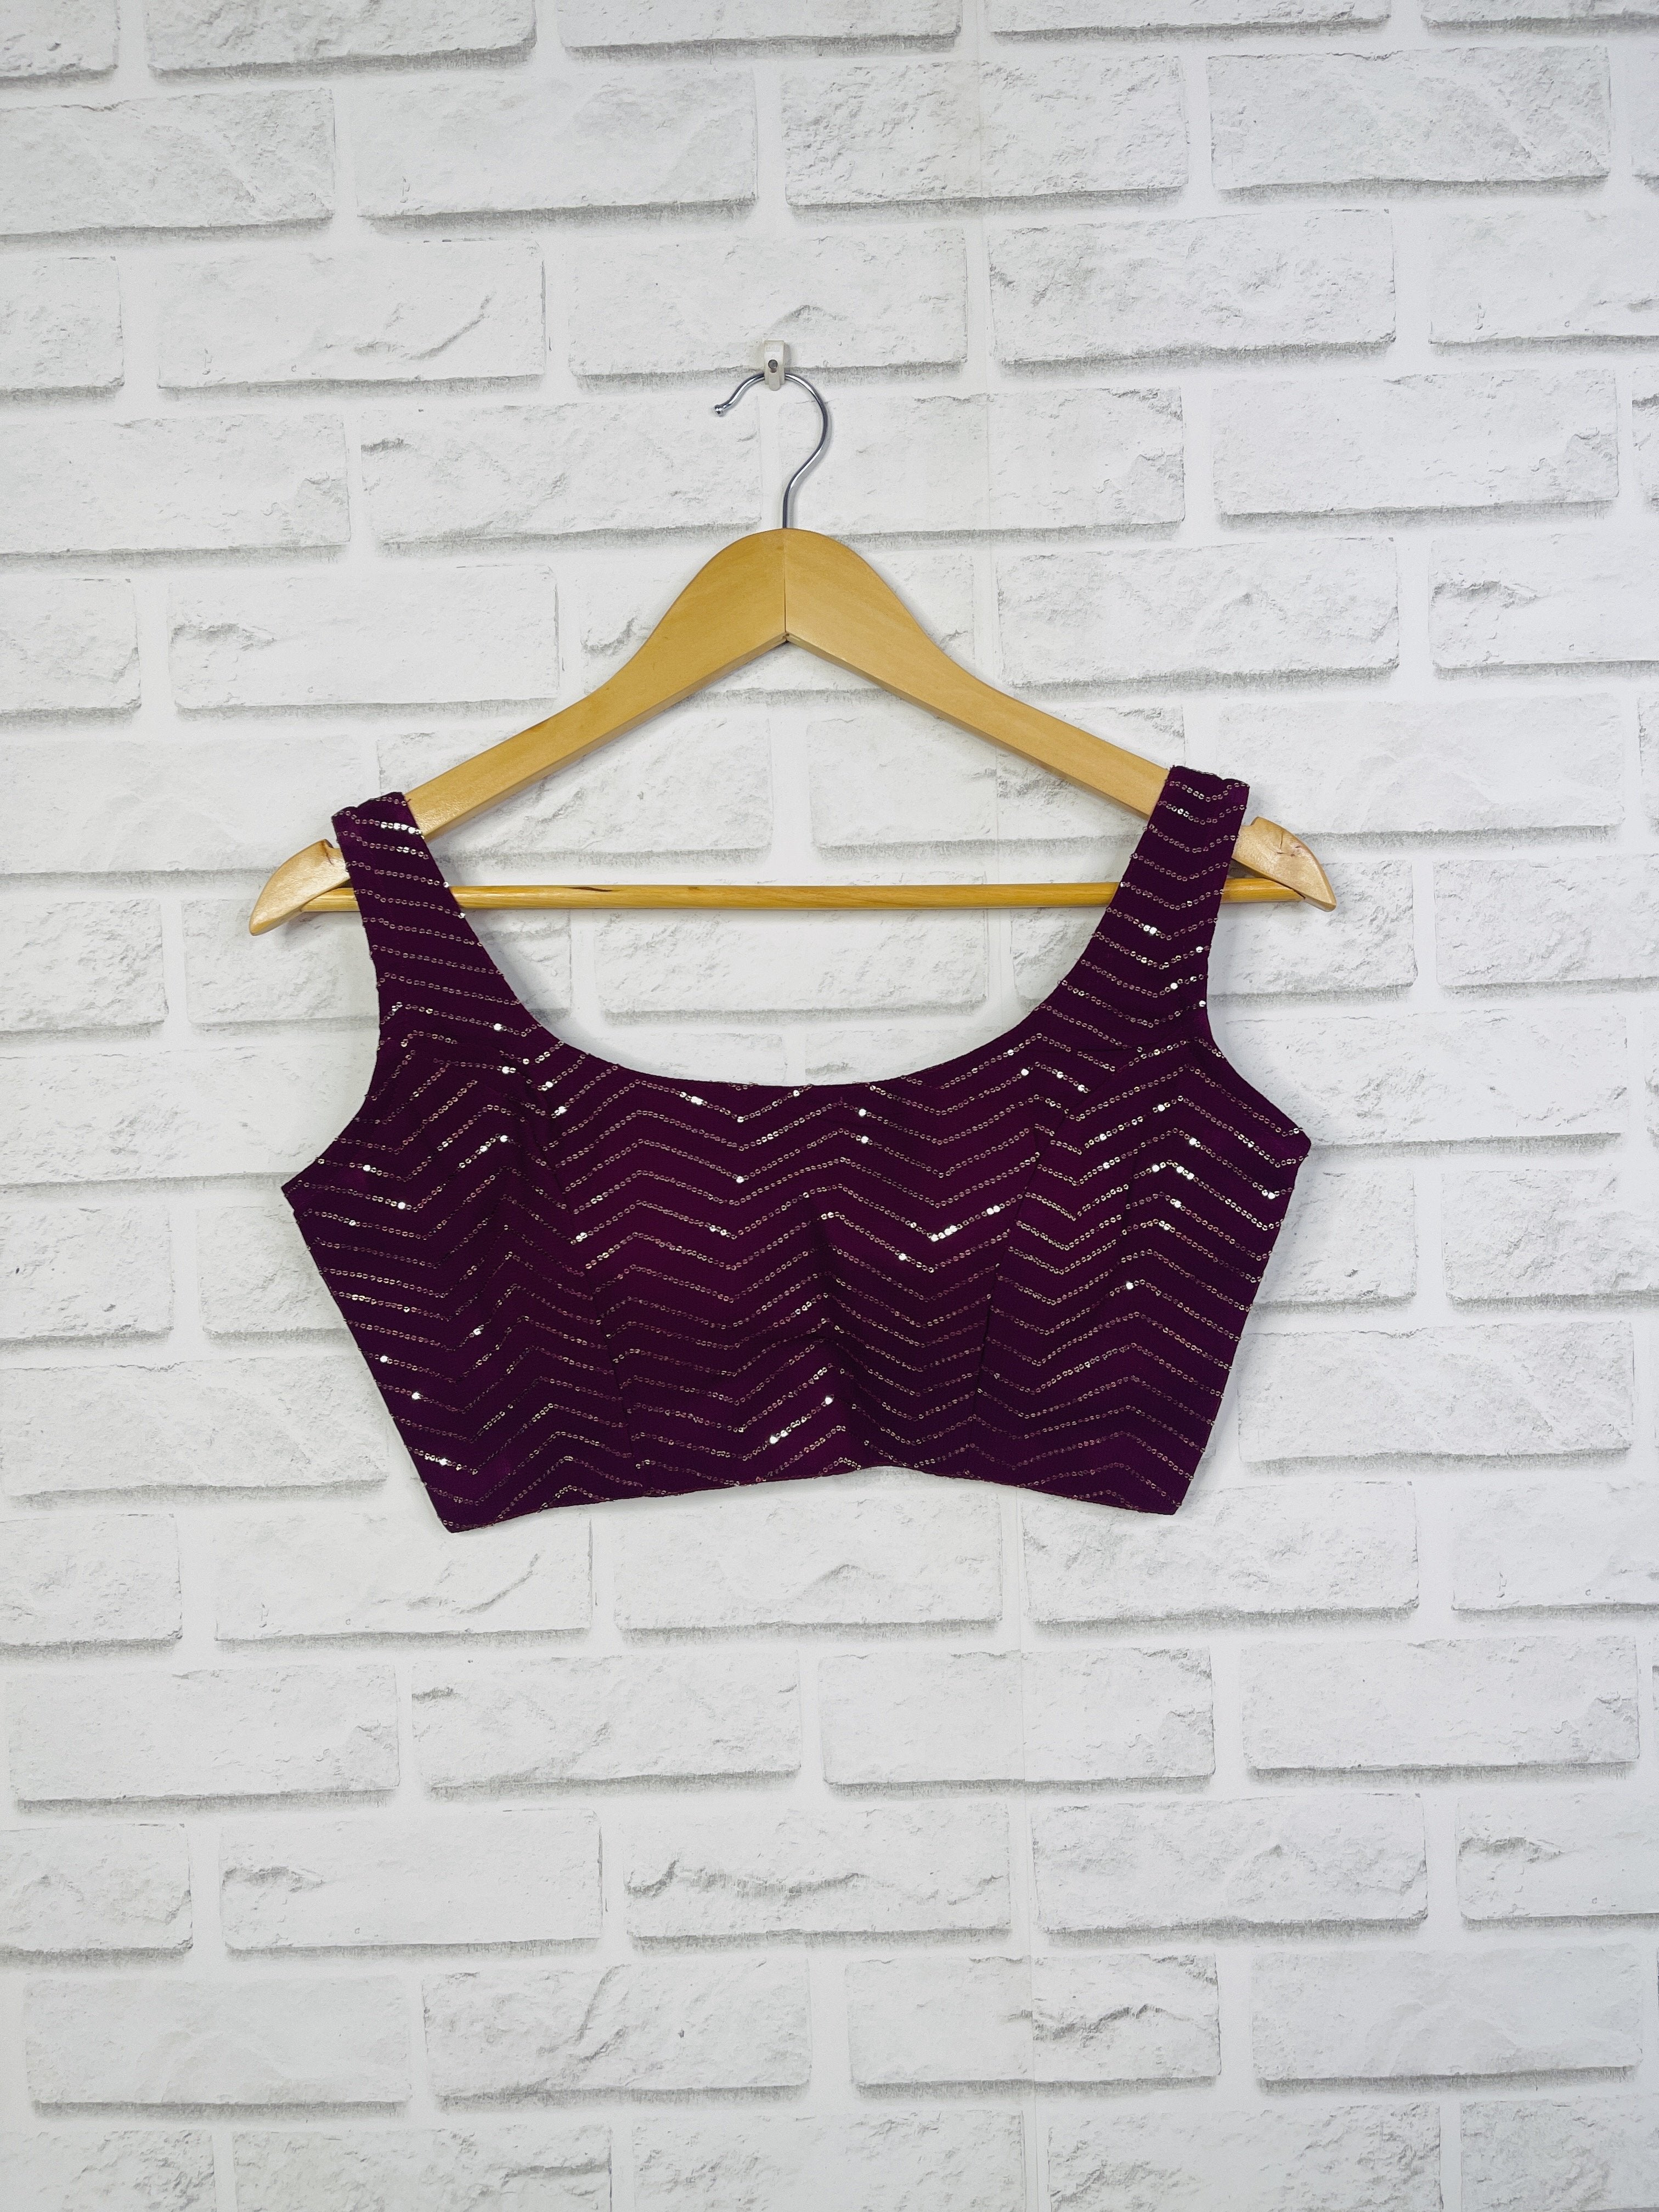 Set of 2- Lilac purple handmade crochia backless bralette crop top blouse  with cotton ikkat saree